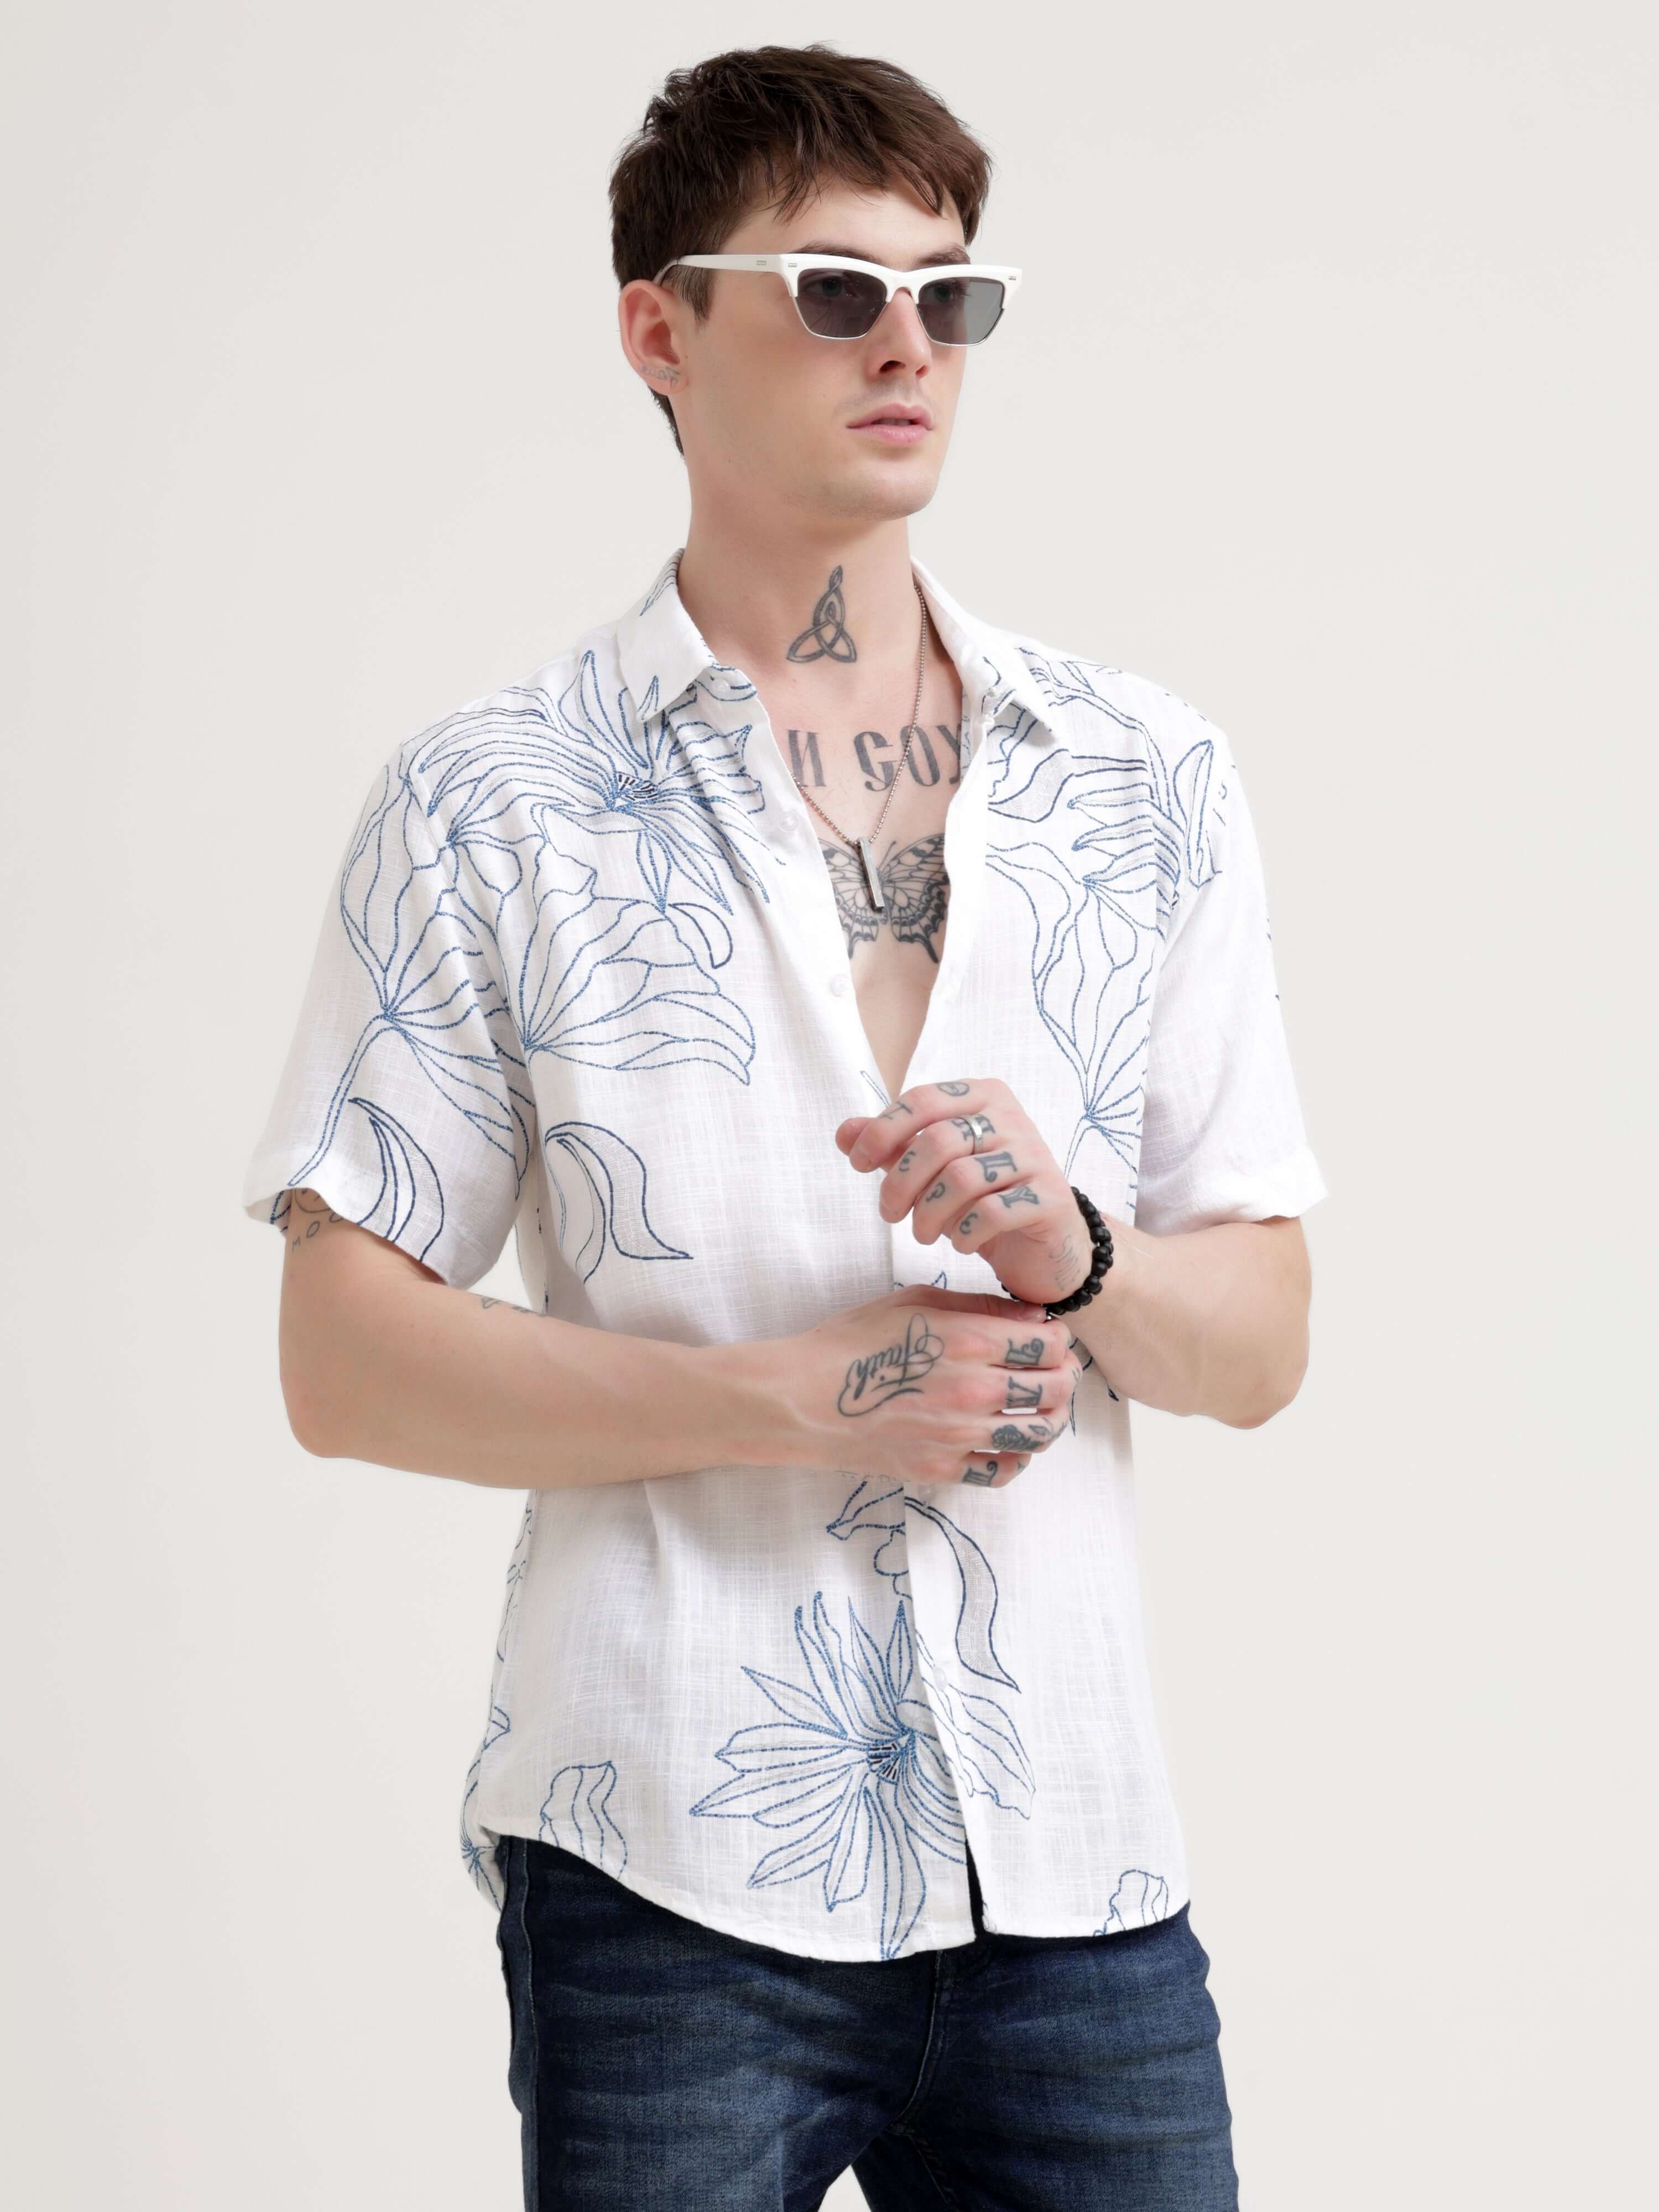 Floral printed blue half sleeve shirt - Men's Casual Wear shop online at Estilocus. Embrace the summer with our Floral printed blue half sleeve shirt. Perfect for Hawaiian days, its comfy & stylish fit makes it a streetwear favorite.